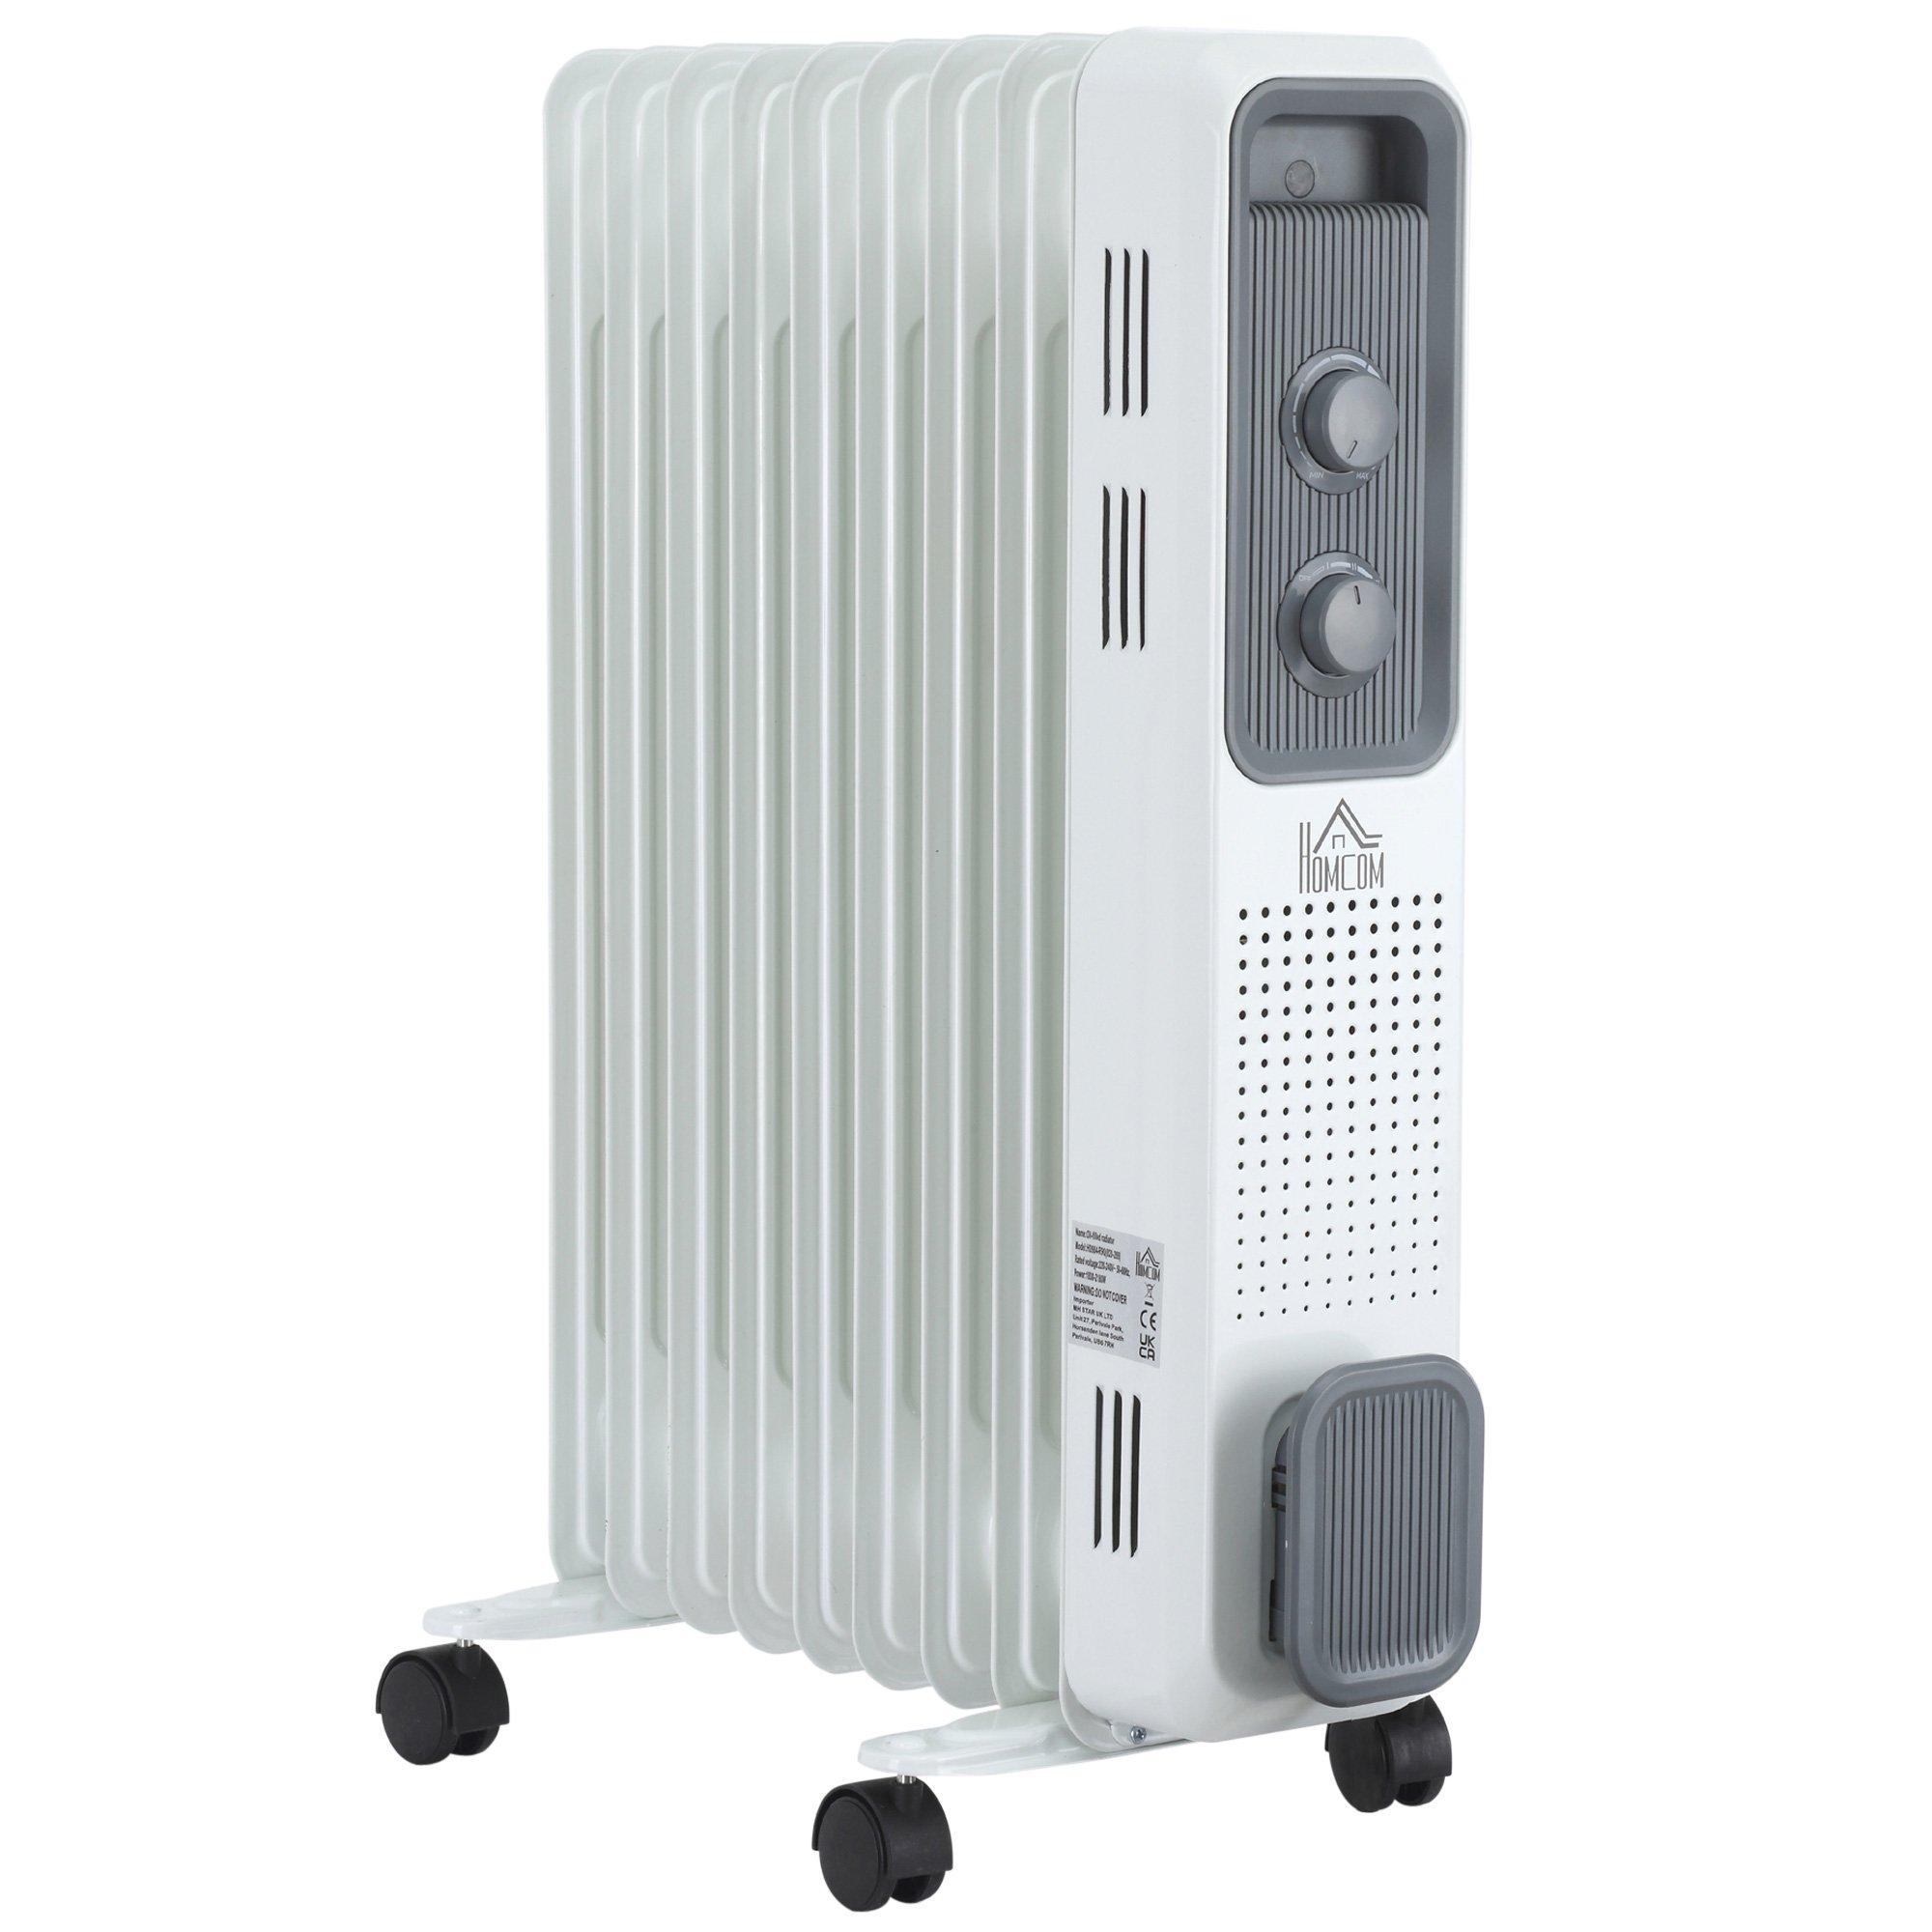 Oil Filled Radiator 9 Fin Portable Heater w/ Wheels and 3 Heat Settings, White